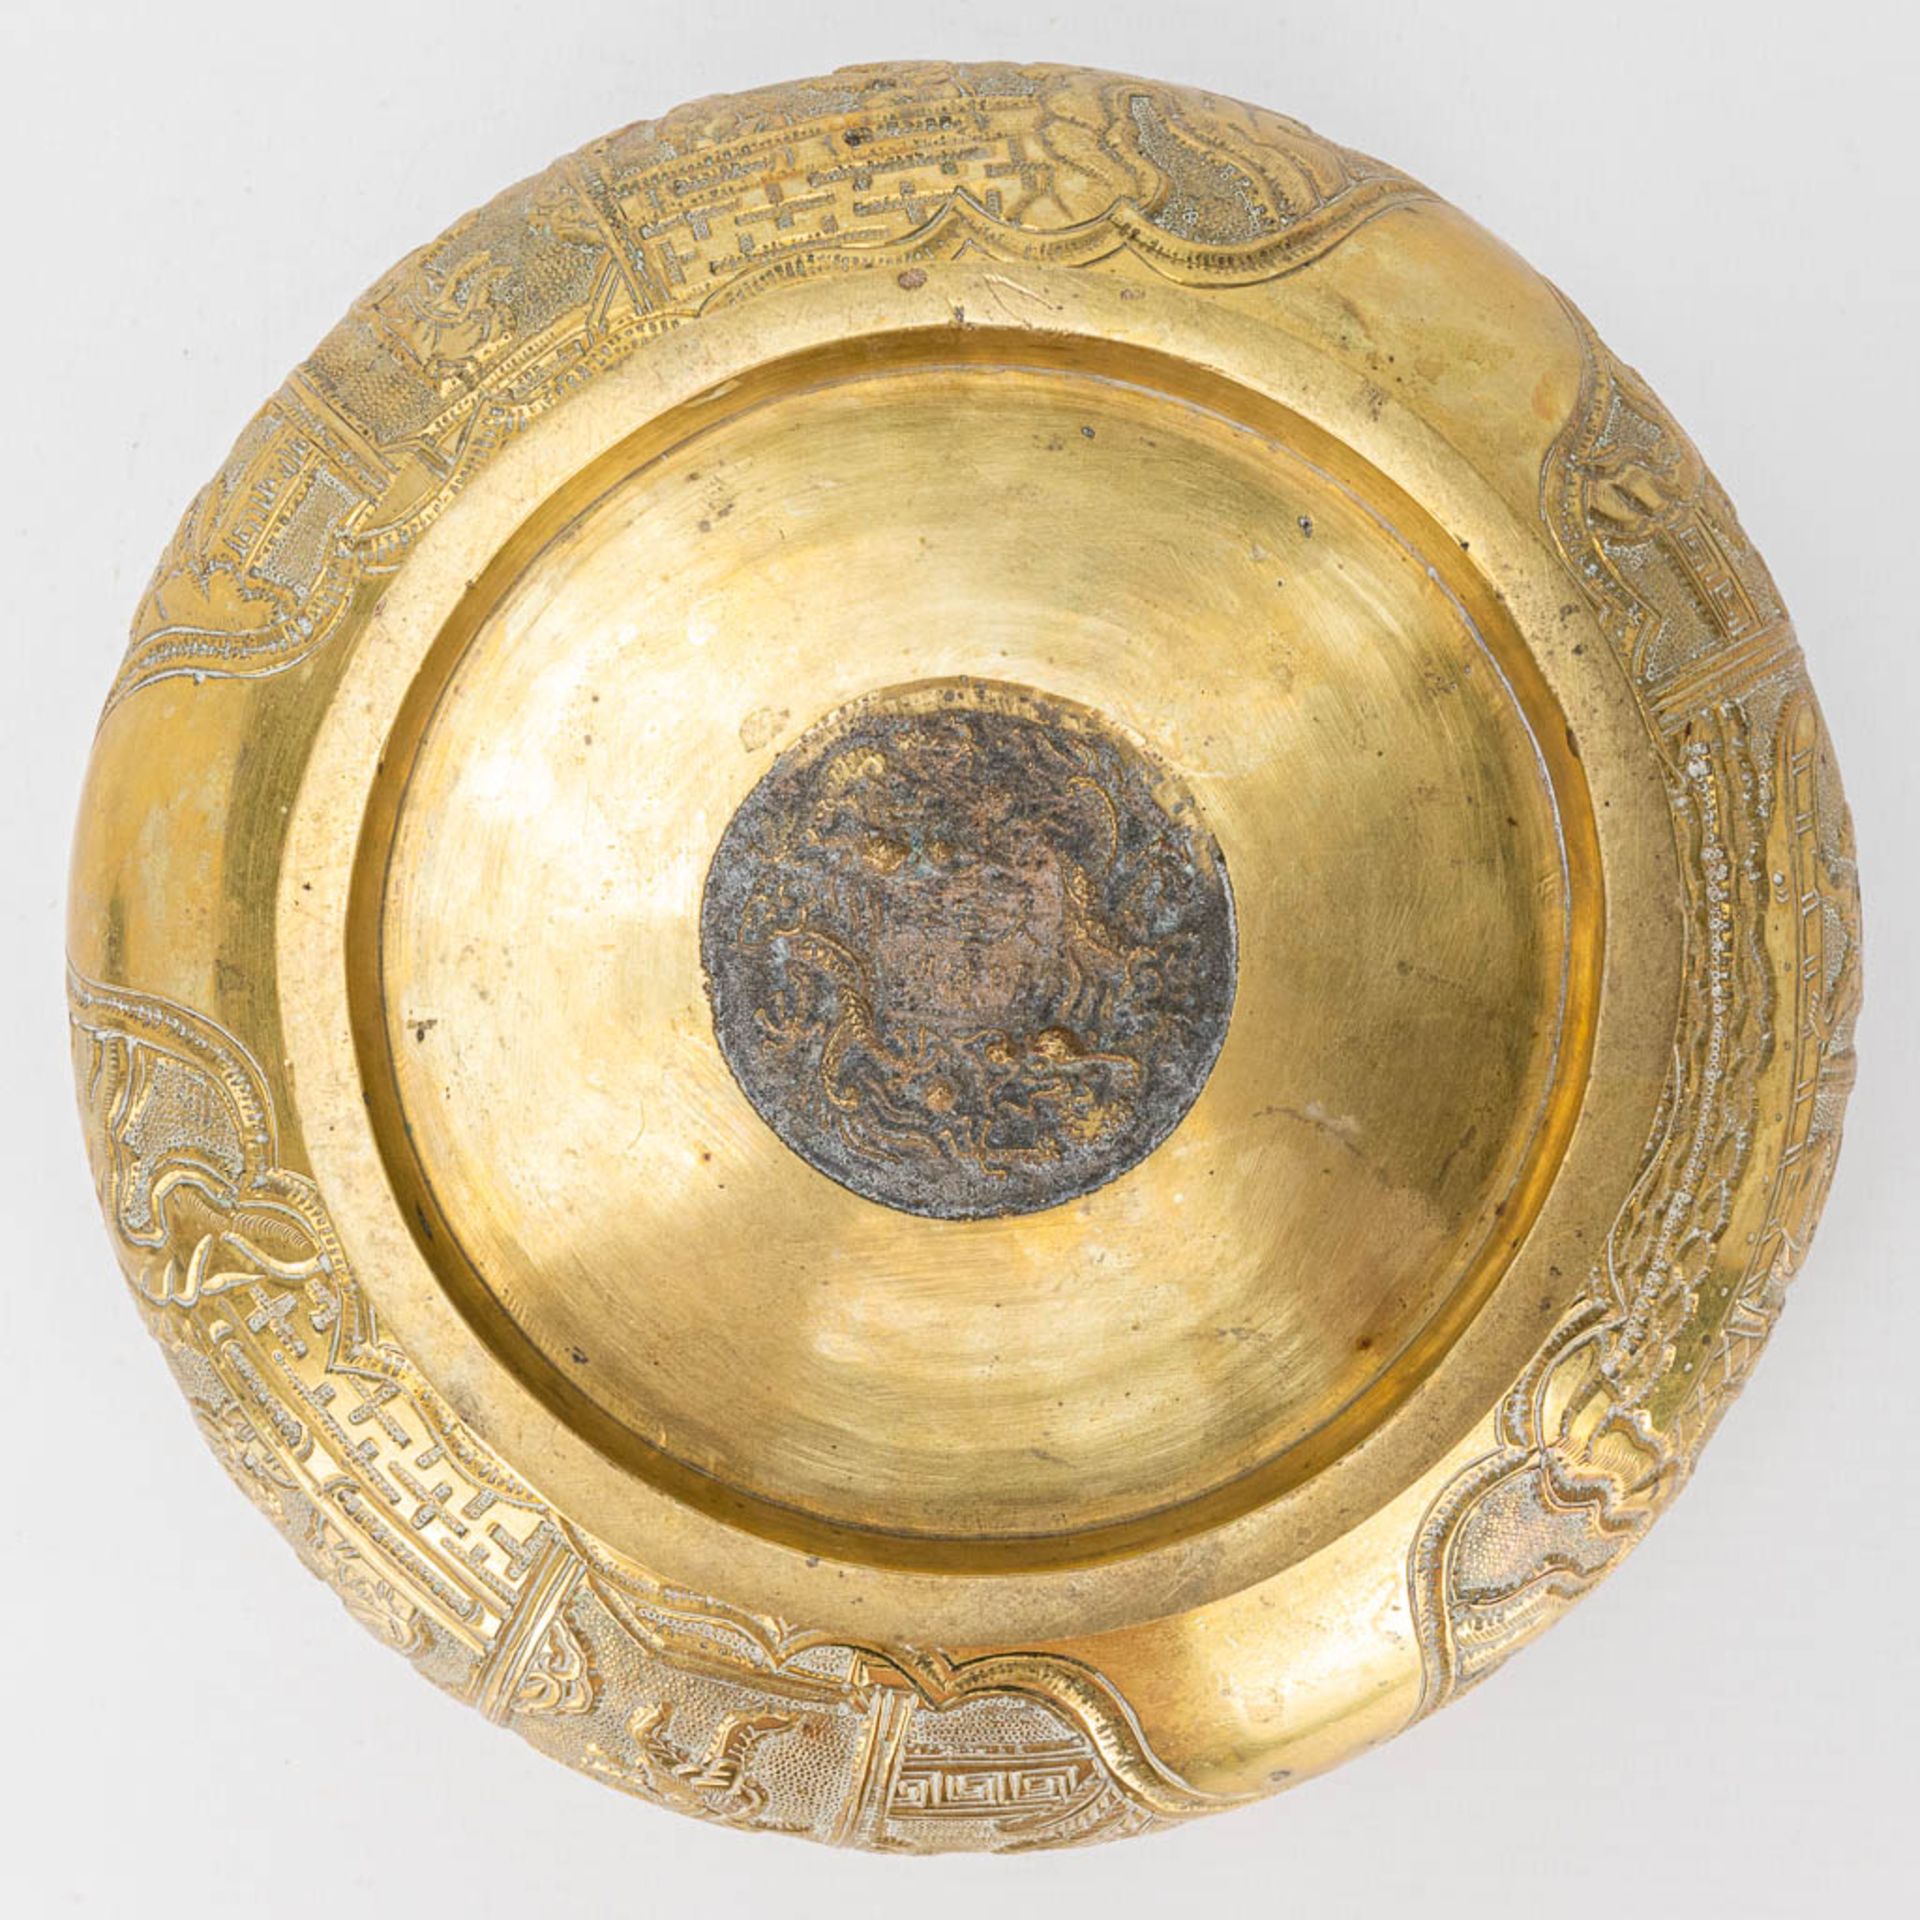 A bronze bržle parfum bowl, on a wood base. Marked Xuande. - Image 8 of 14